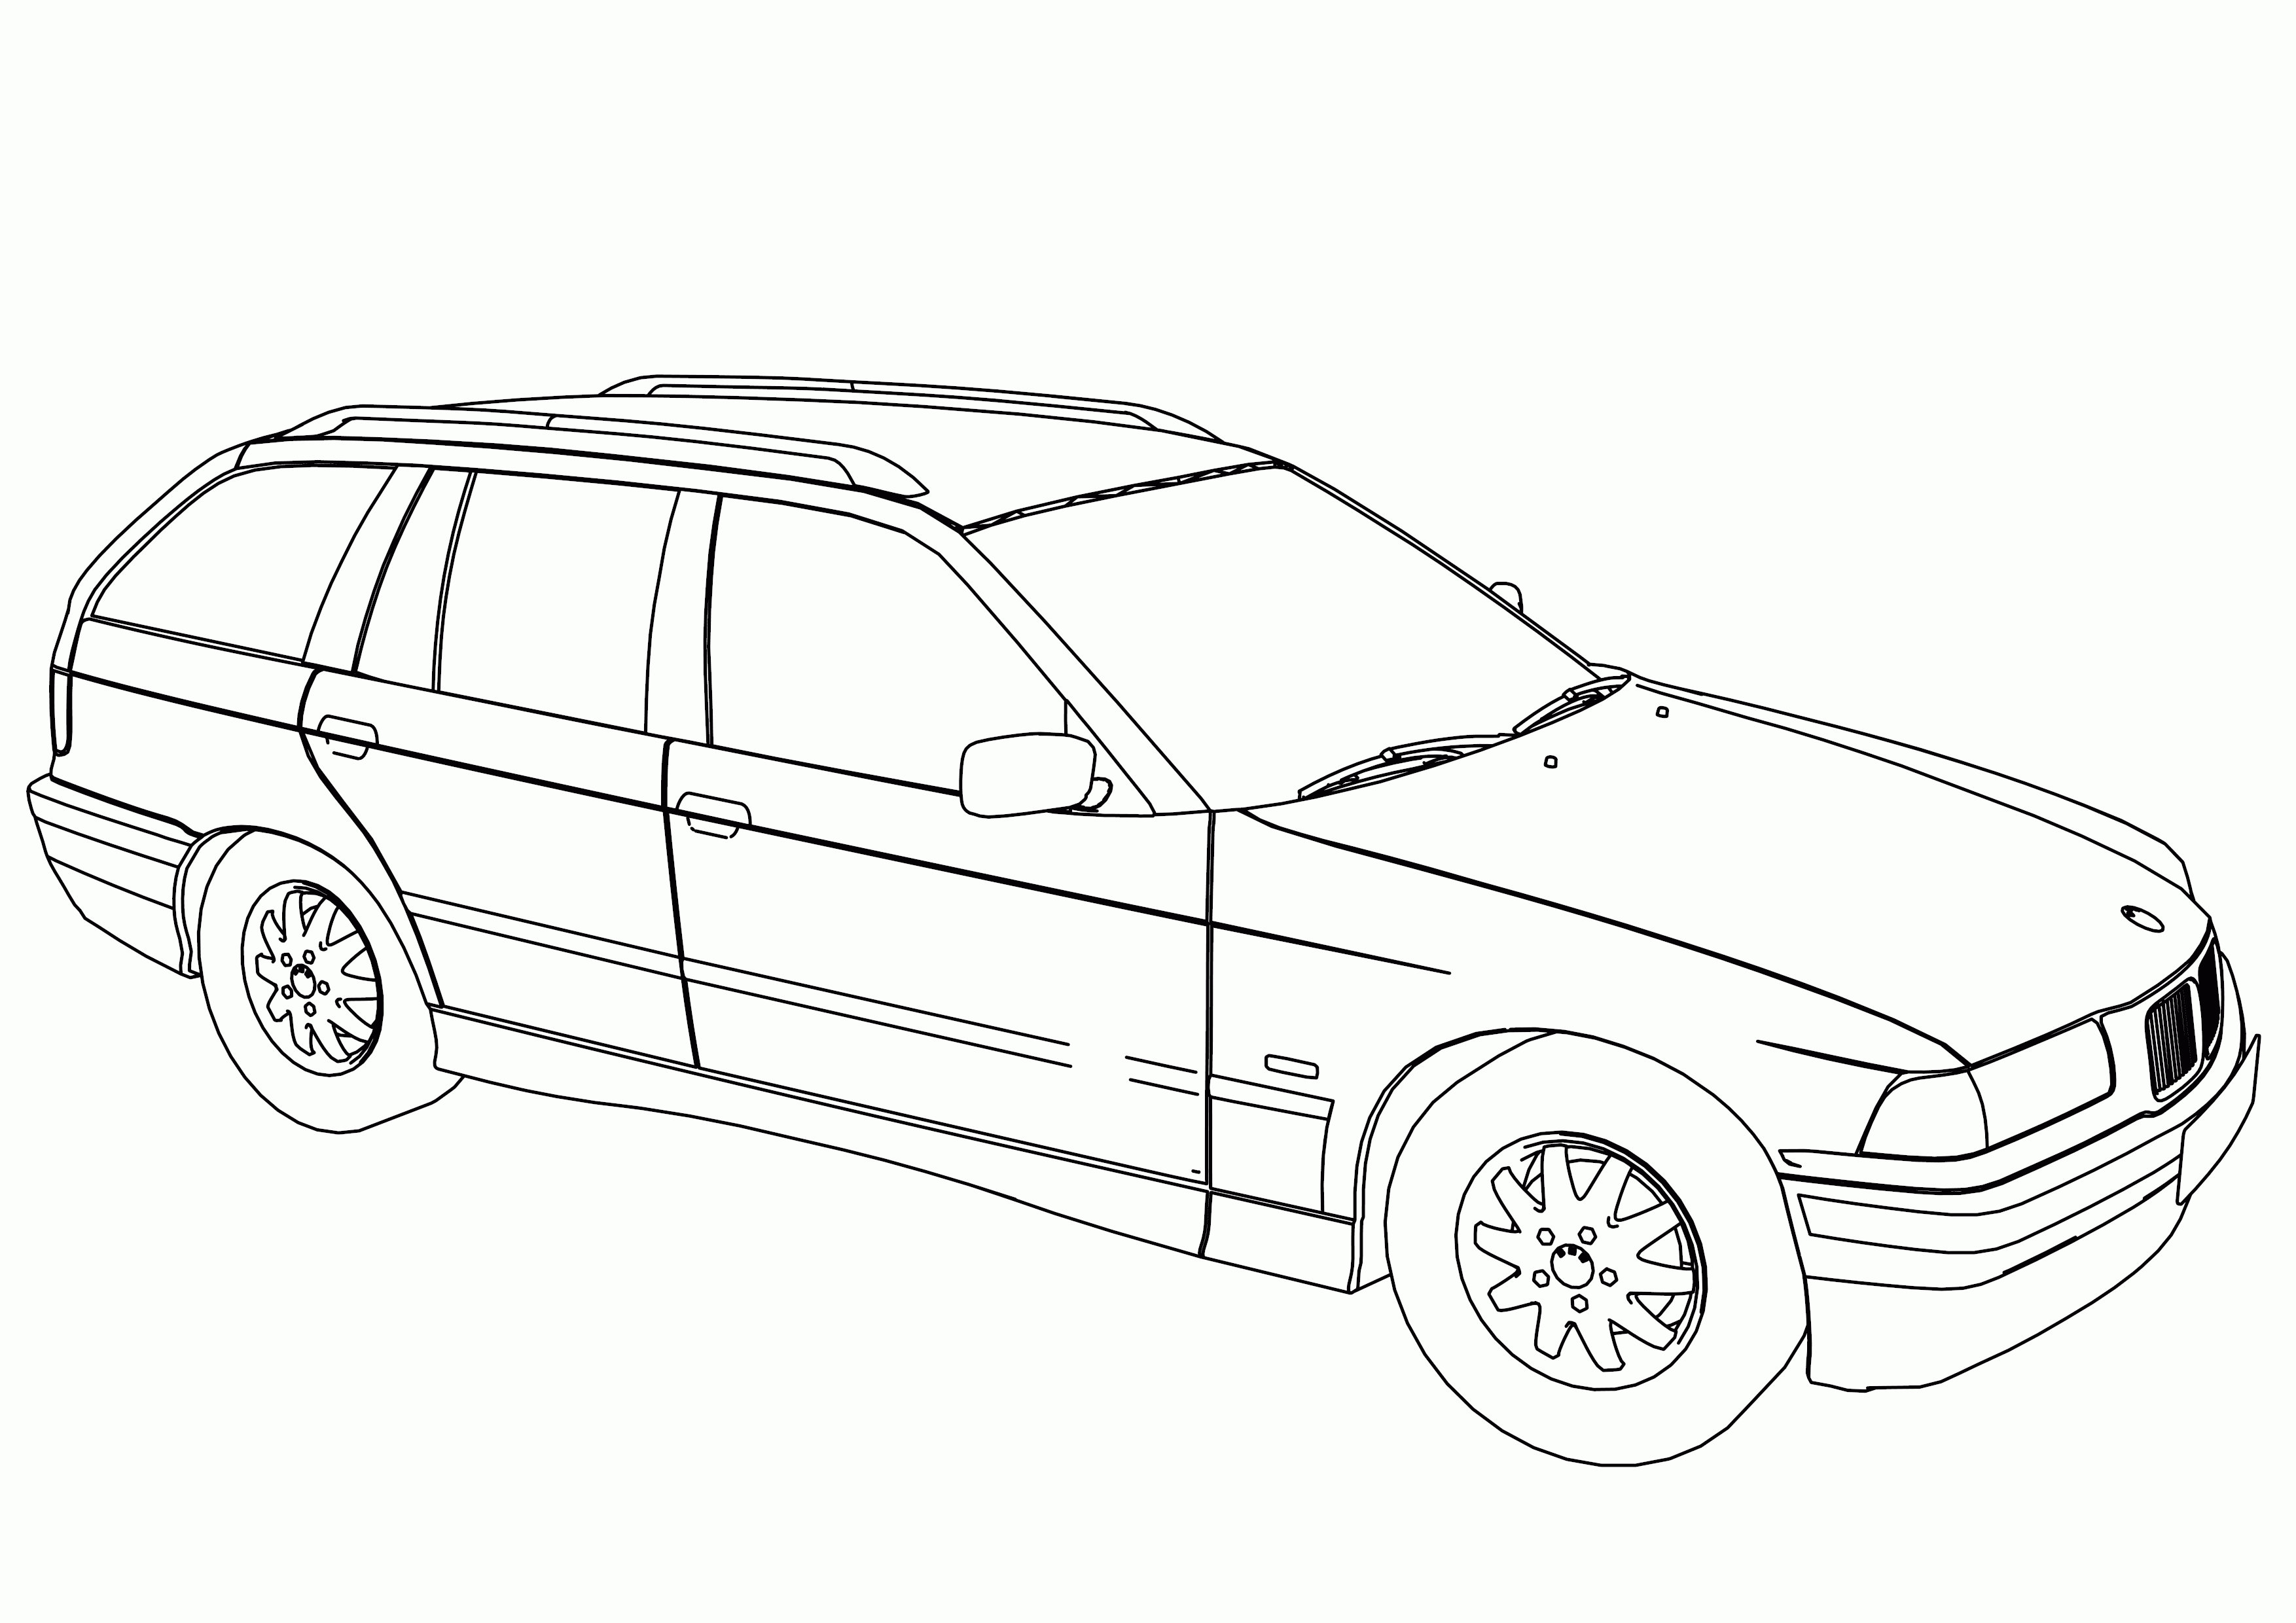 Bmw 318 Model Touring Car Coloring Page | Wecoloringpage